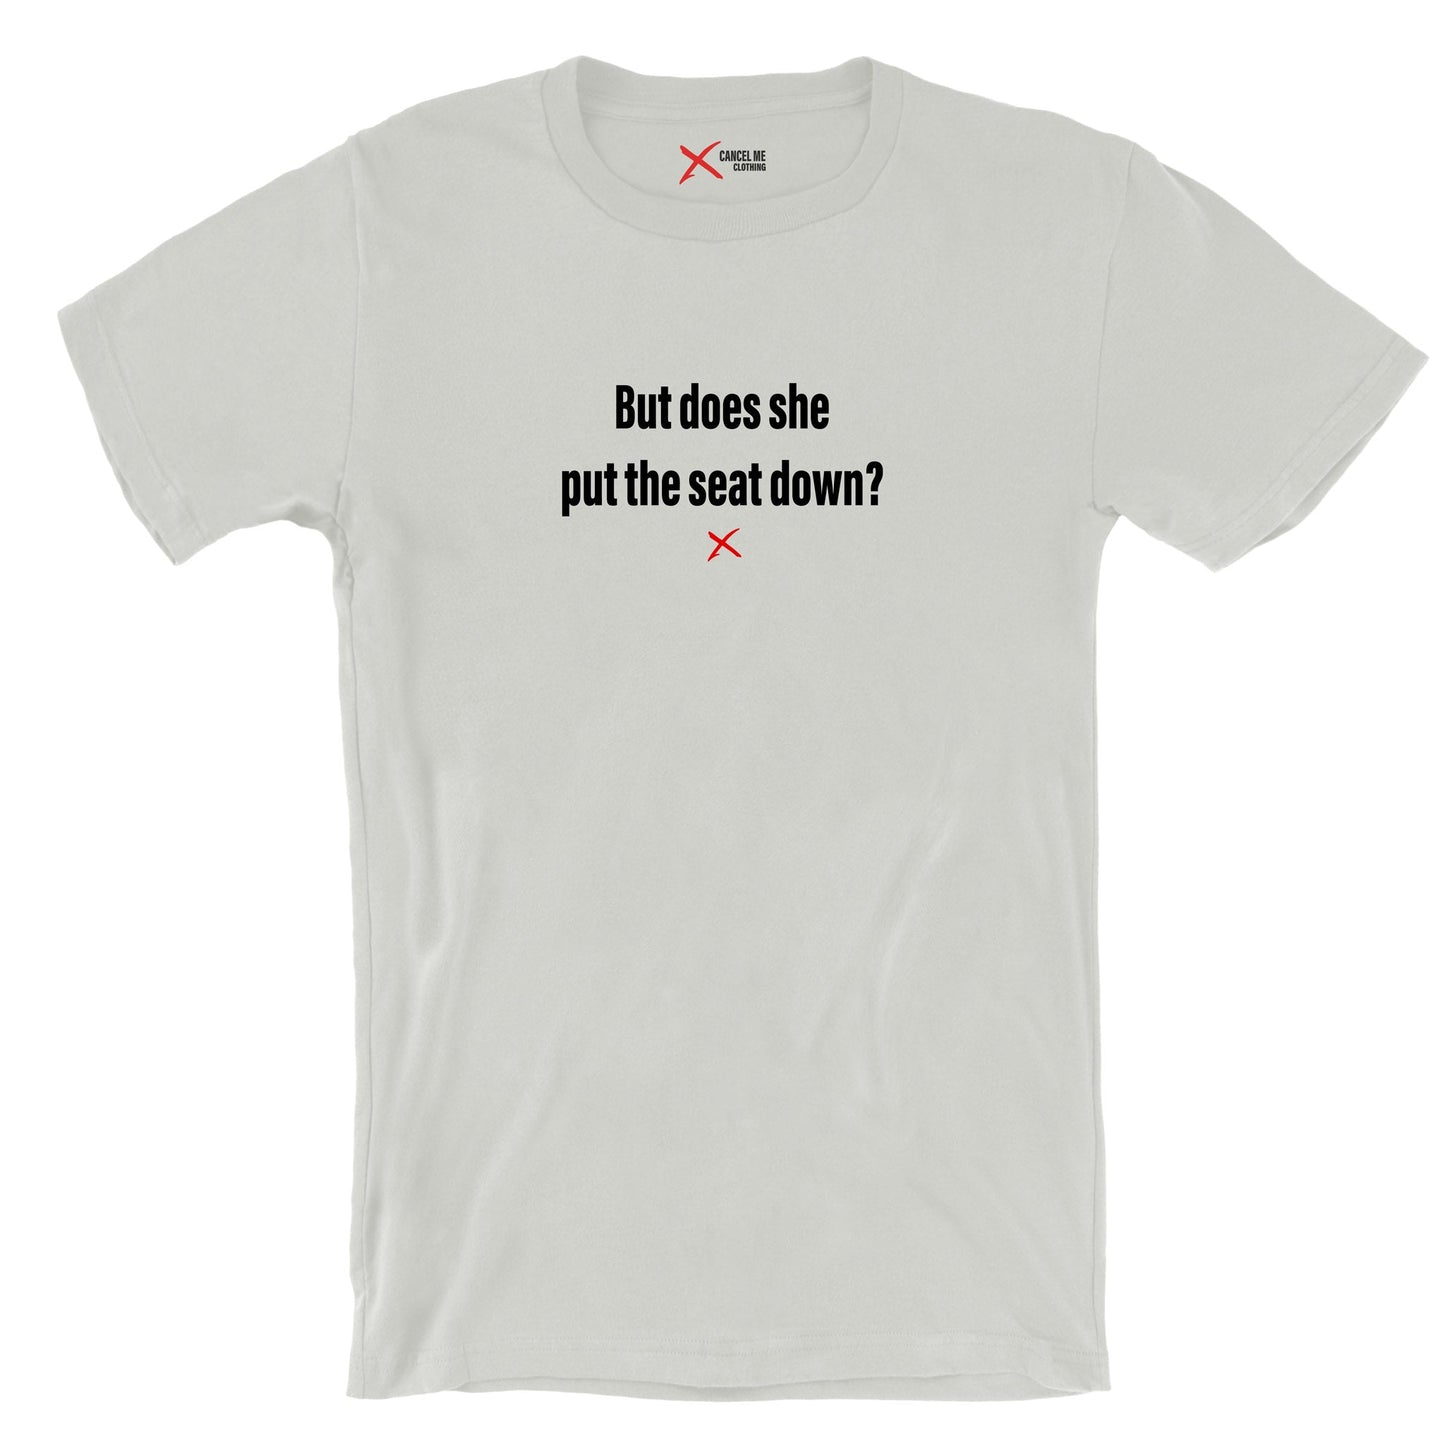 But does she put the seat down? - Shirt